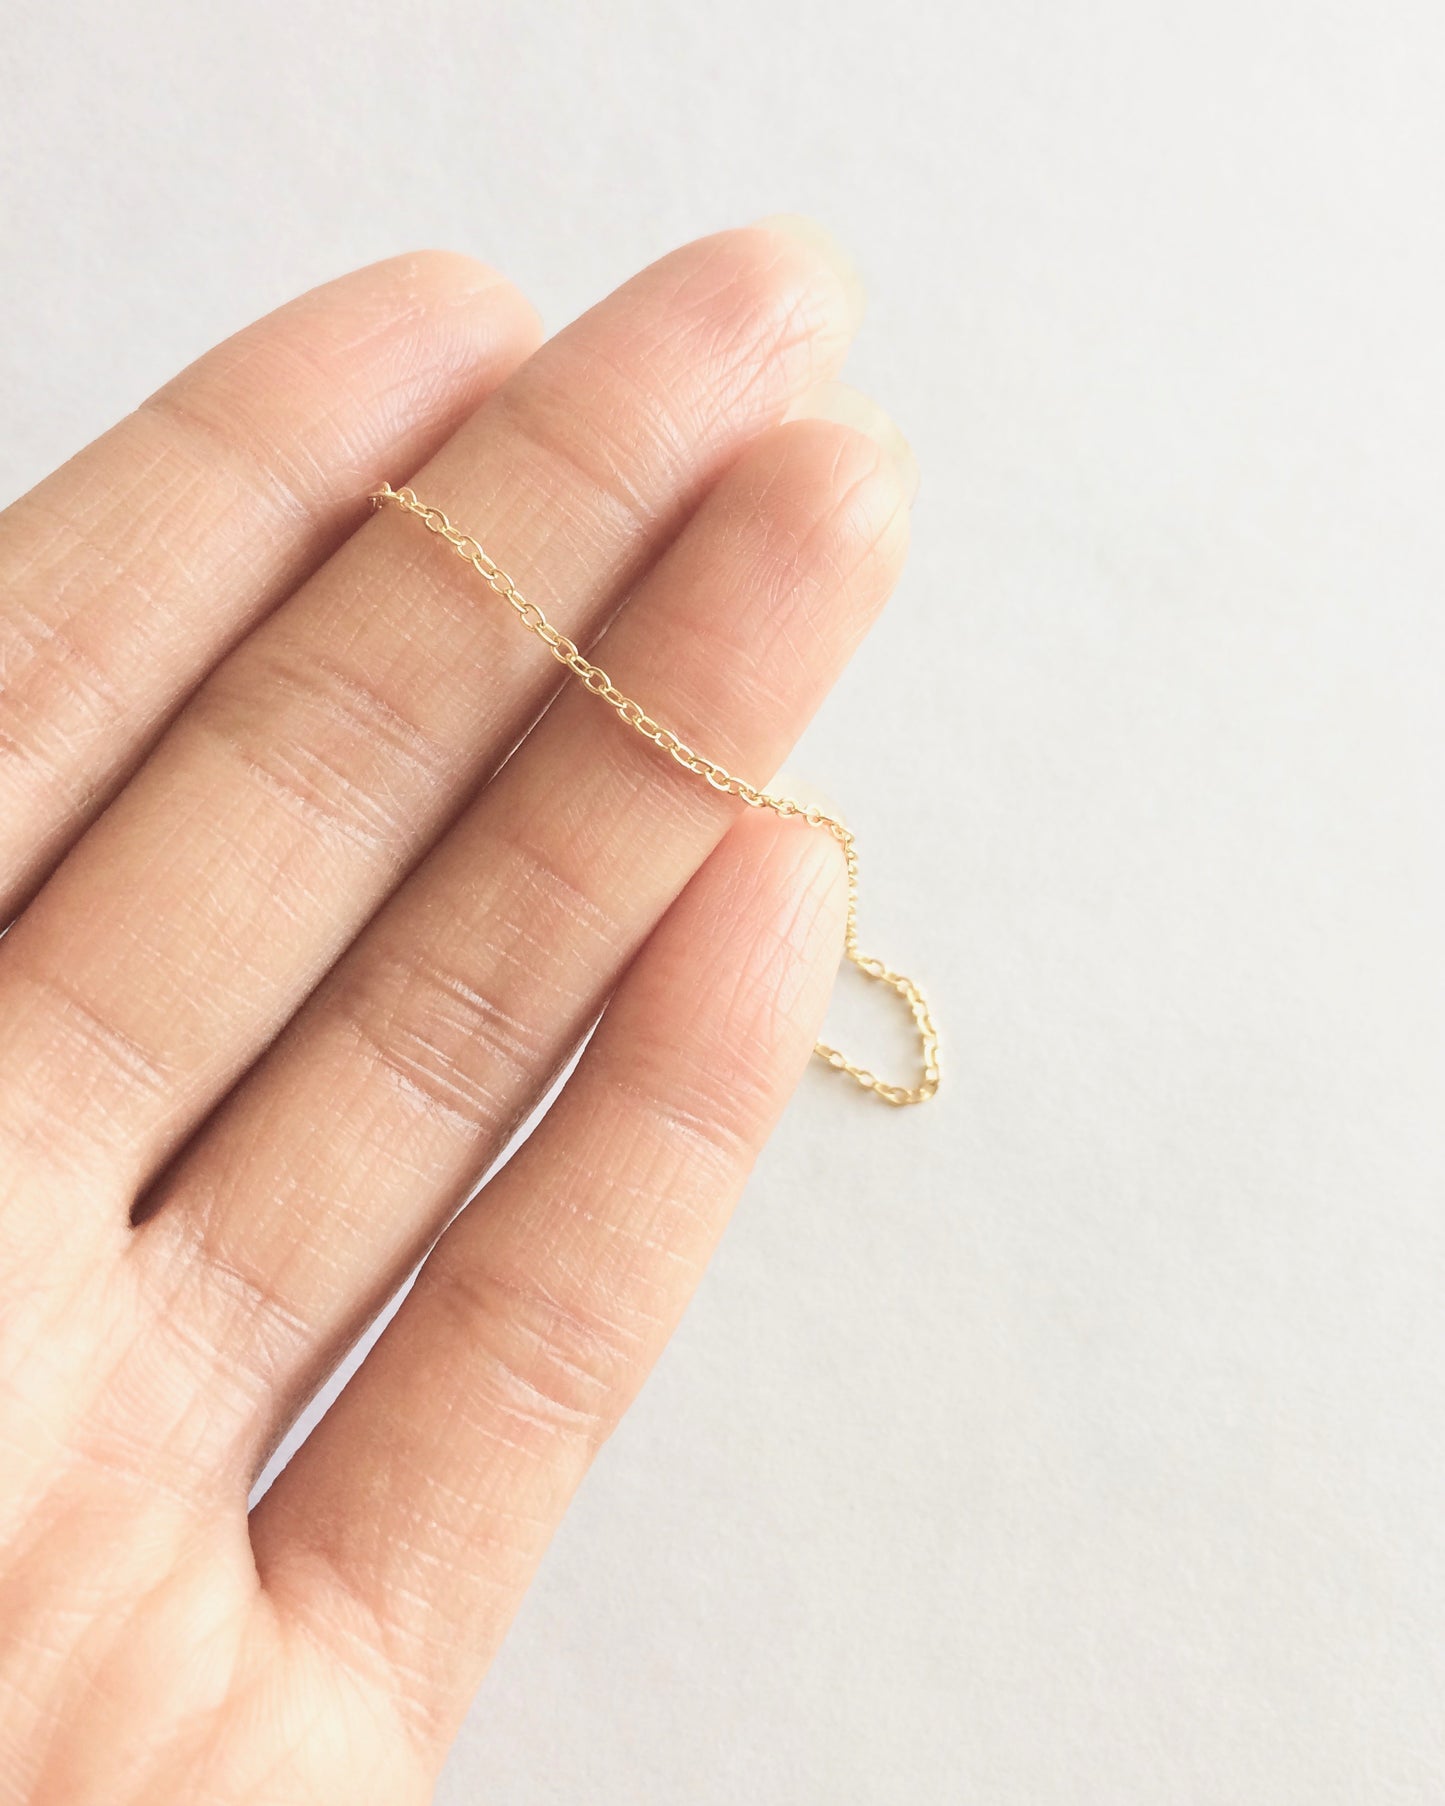 Minimalist Delicate Plain Thin Chain Bracelet in Gold Filled or Sterling Silver | IB Jewelry